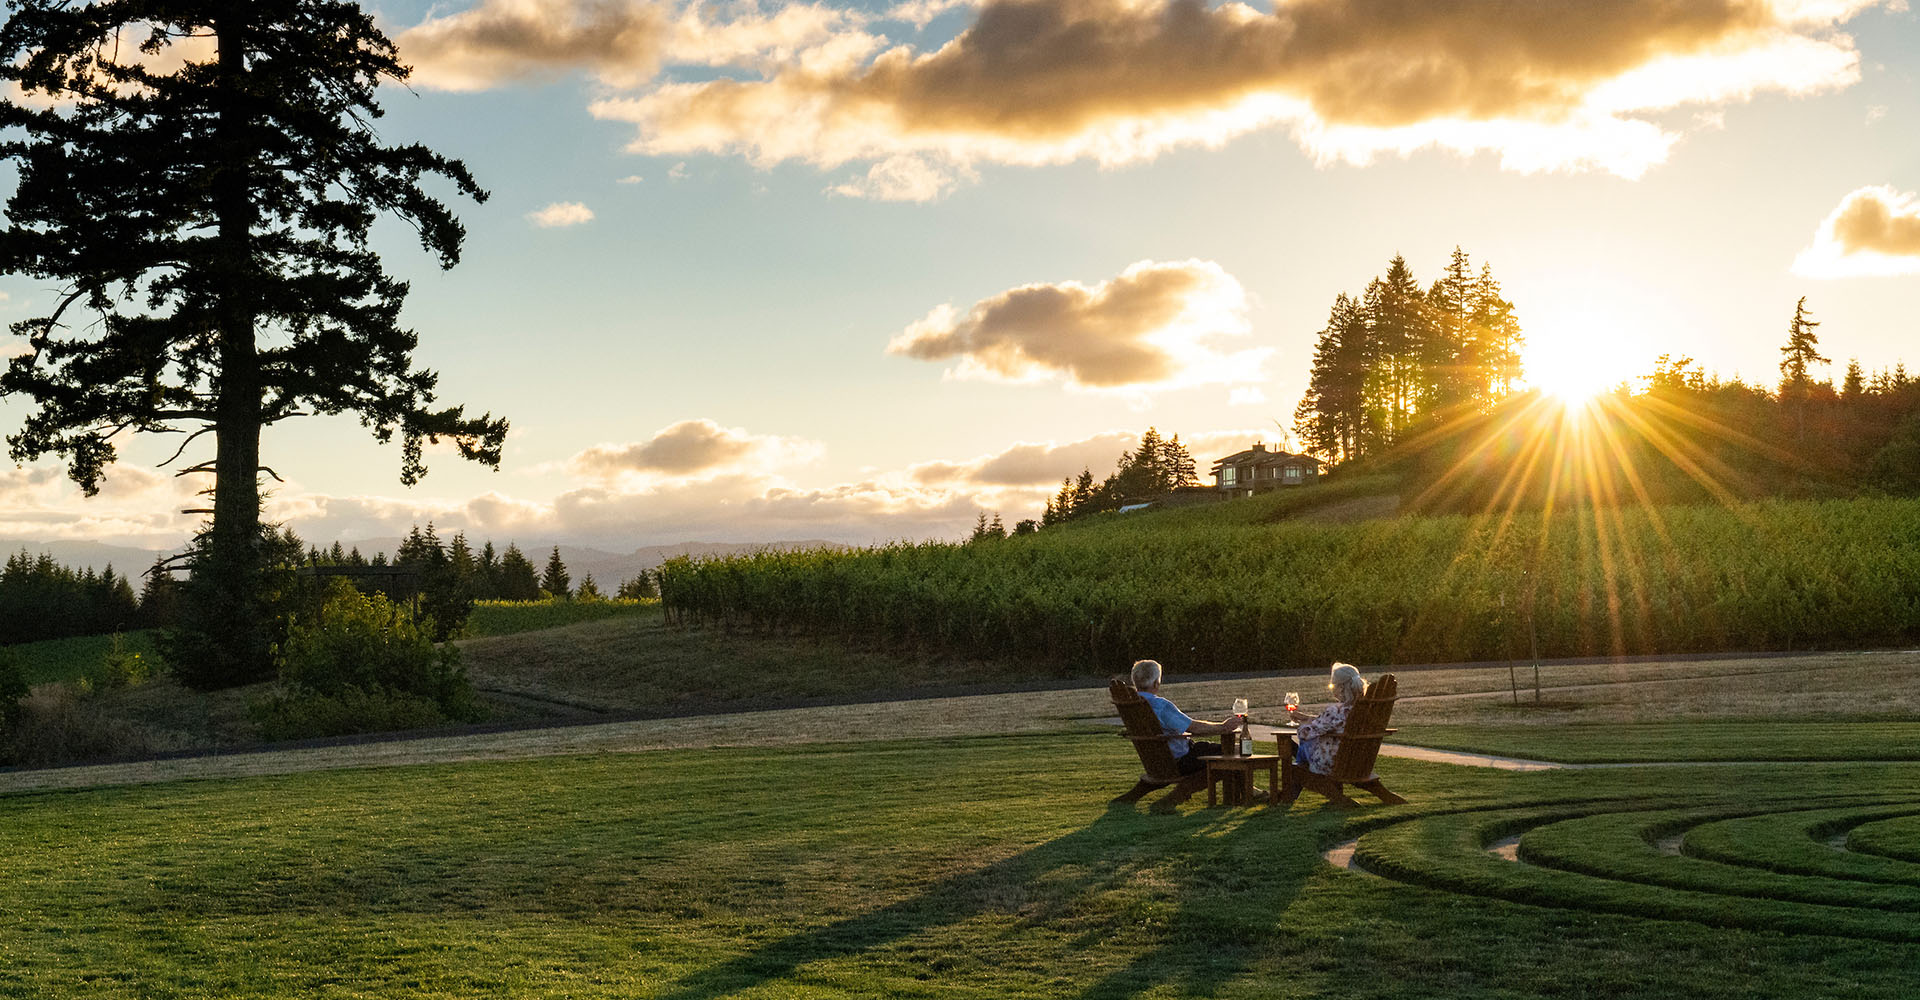 Fairsing Vineyard guest toast with glasses of Pinot noir grown on the estate in Oregon's Willamette Valley